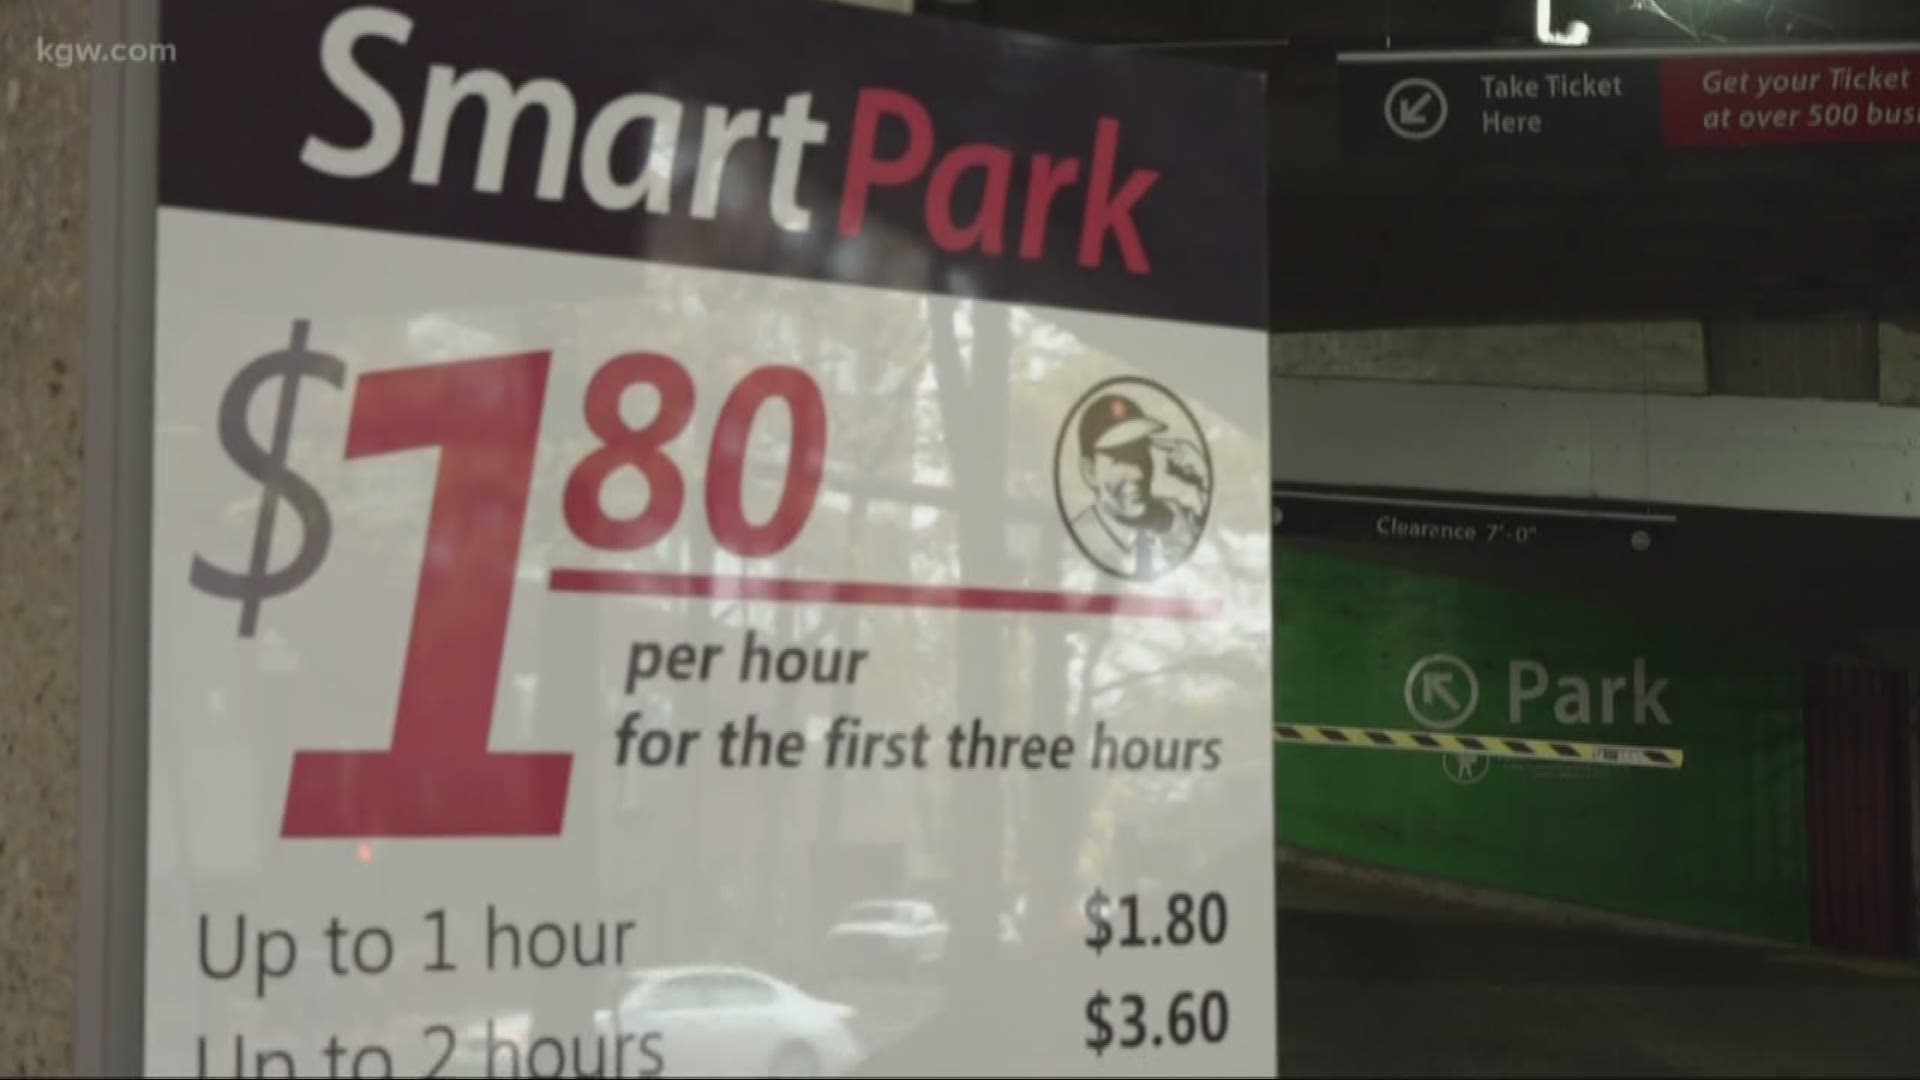 It’s going to be more expensive to park long term. Smartpark rates are going up.